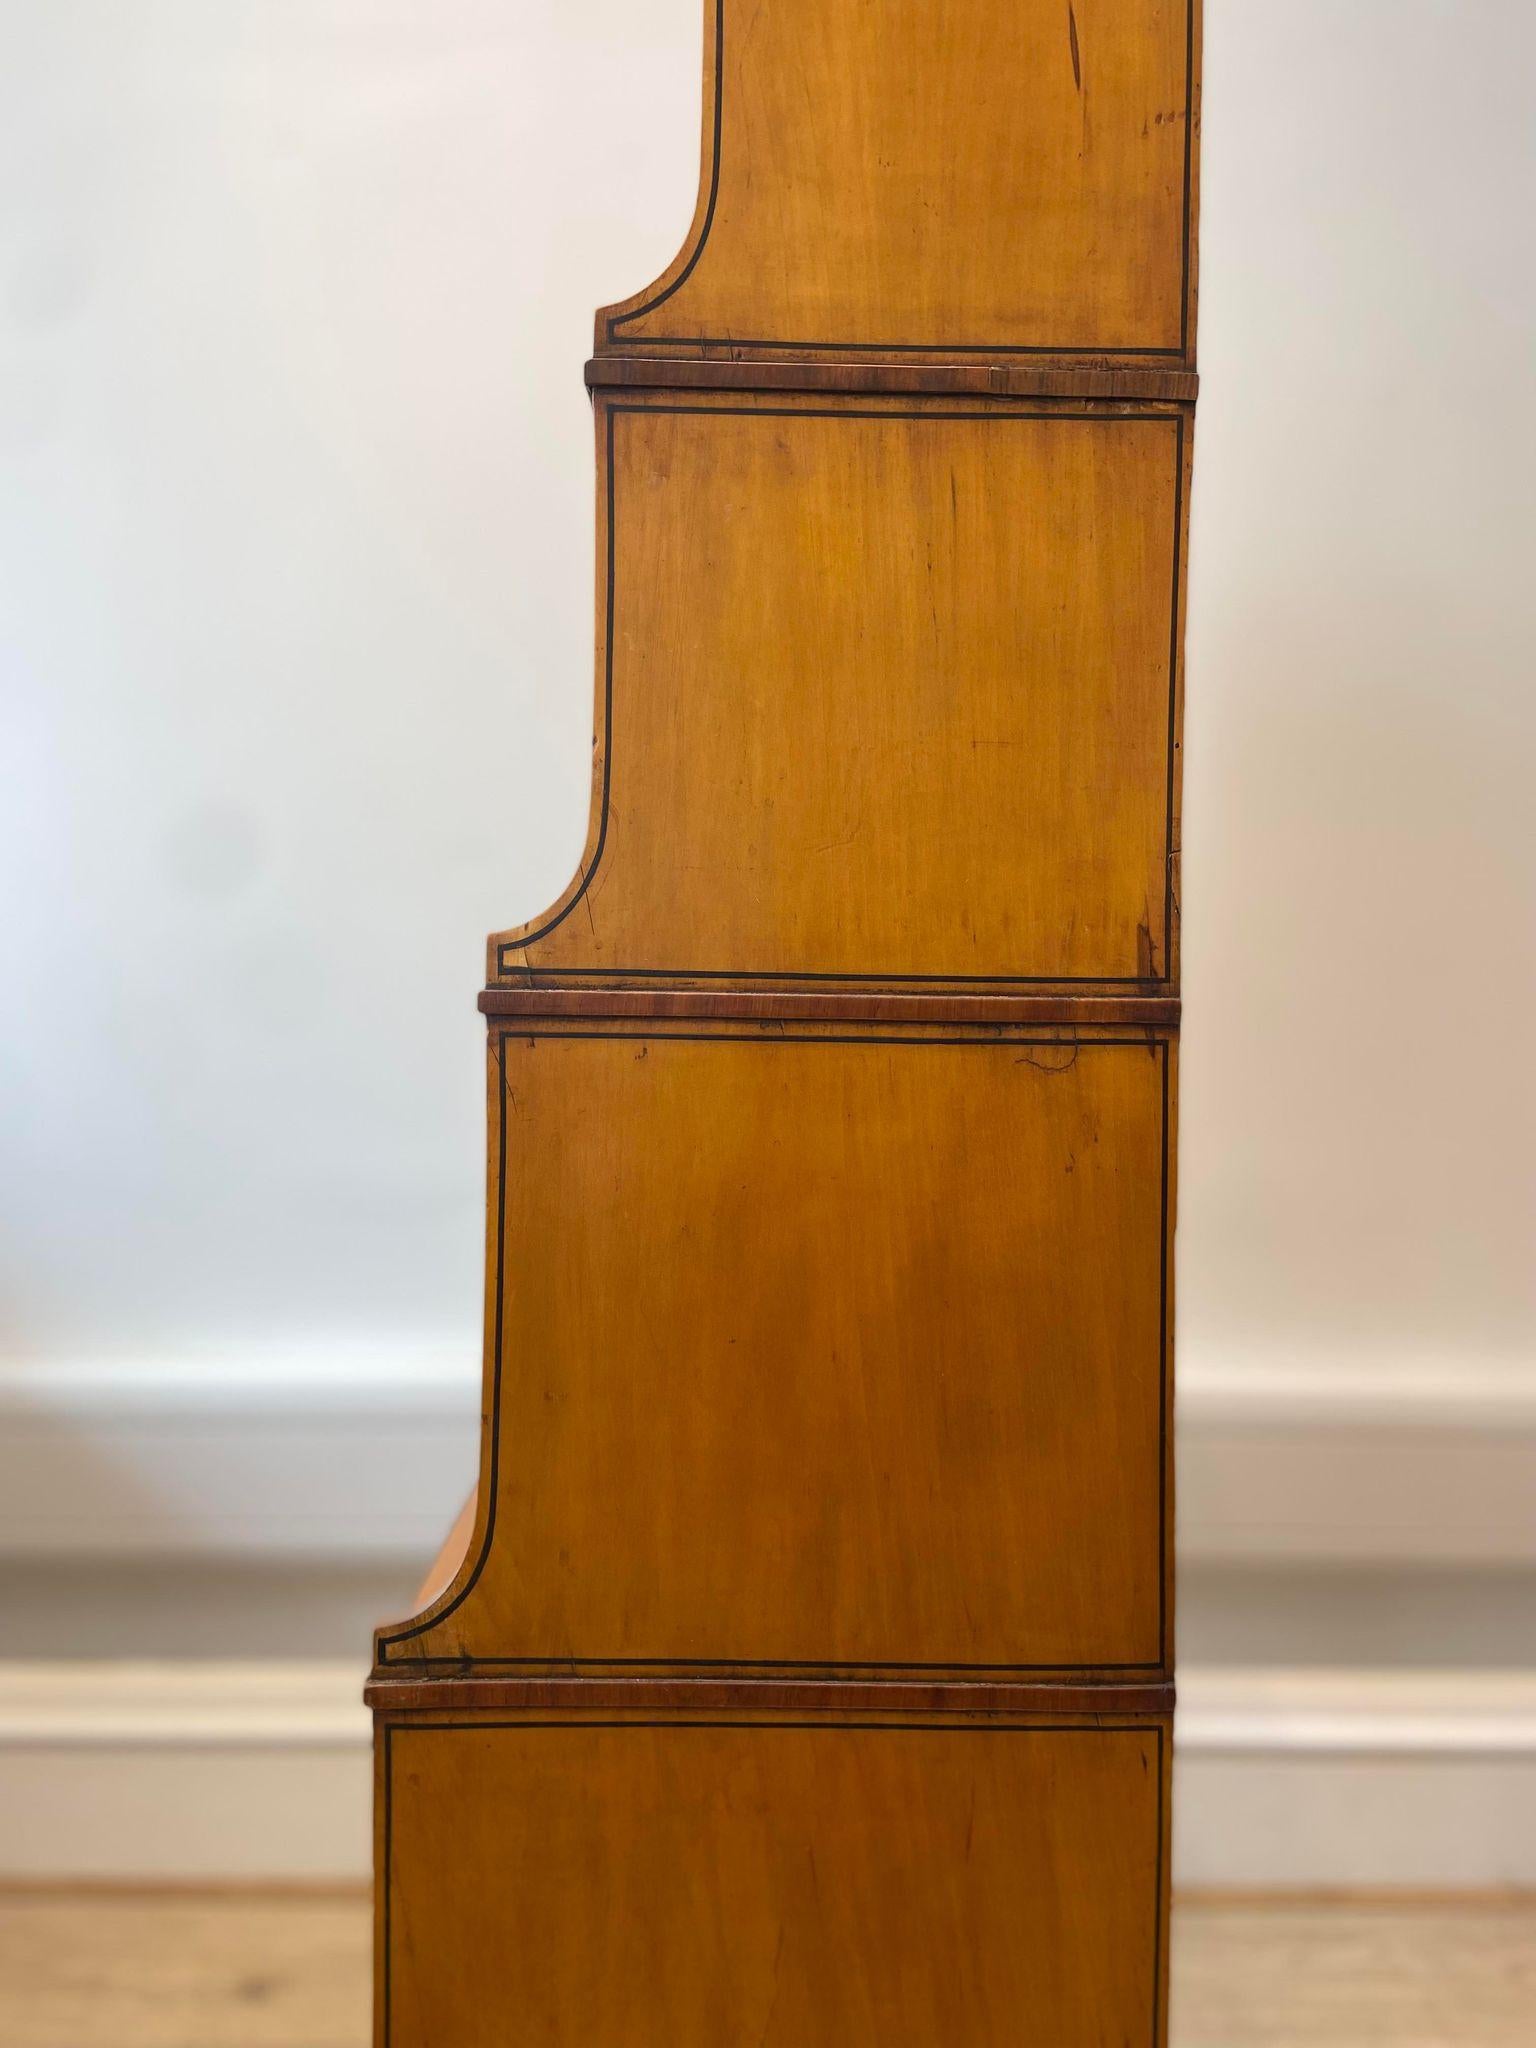 Antique Regency Satinwood Shelving Unit, 1800 In Good Condition For Sale In London, GB